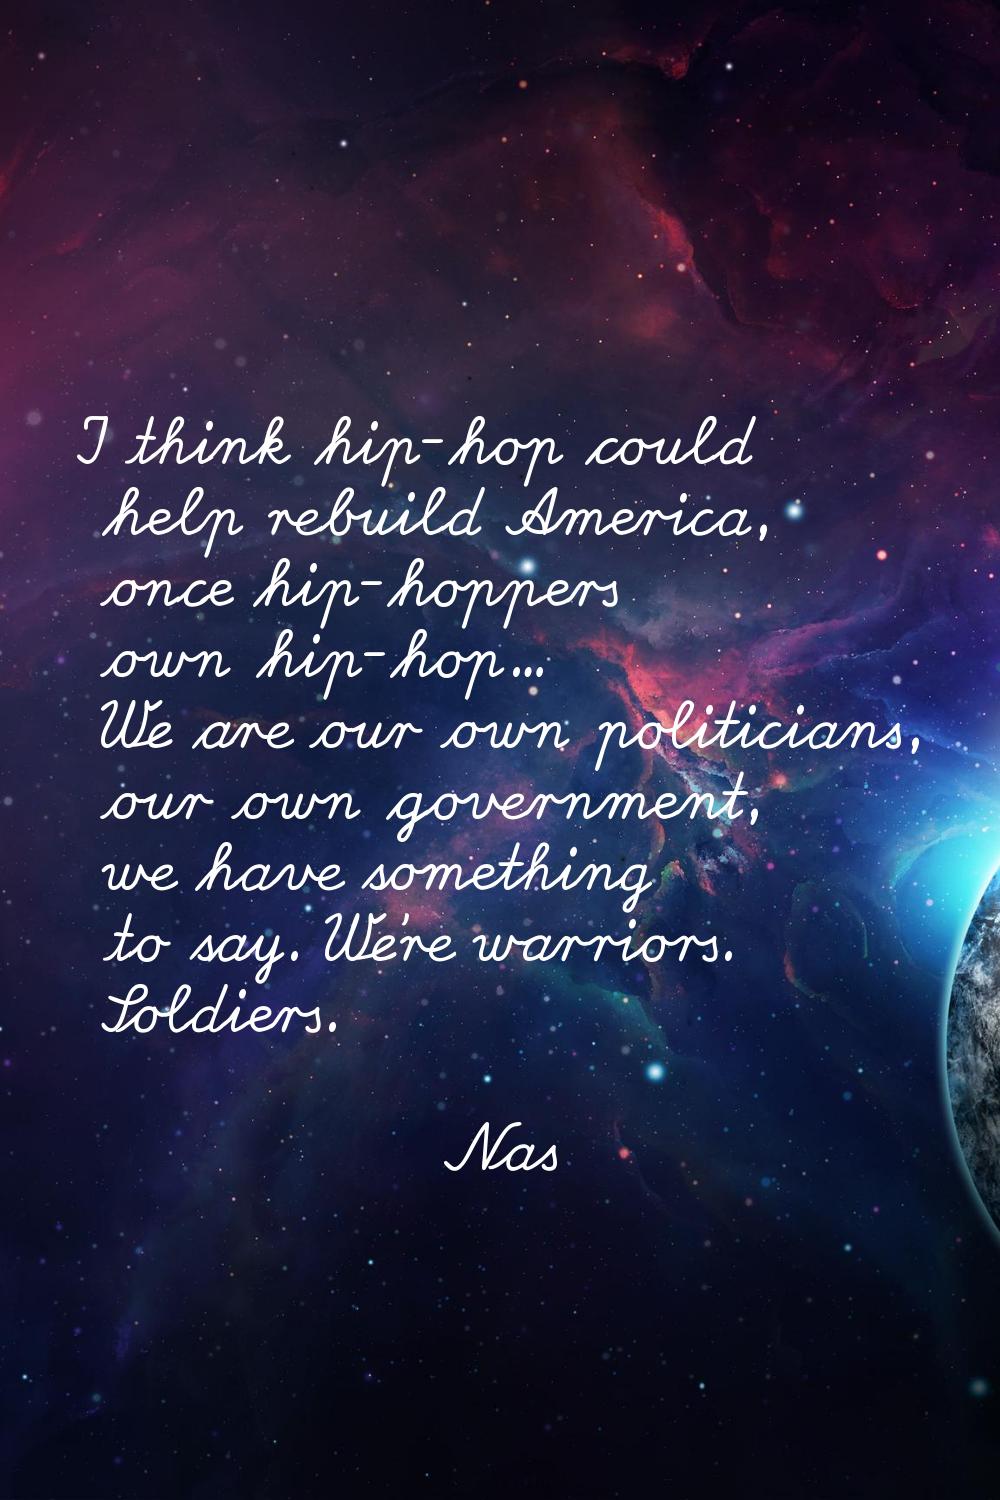 I think hip-hop could help rebuild America, once hip-hoppers own hip-hop... We are our own politici